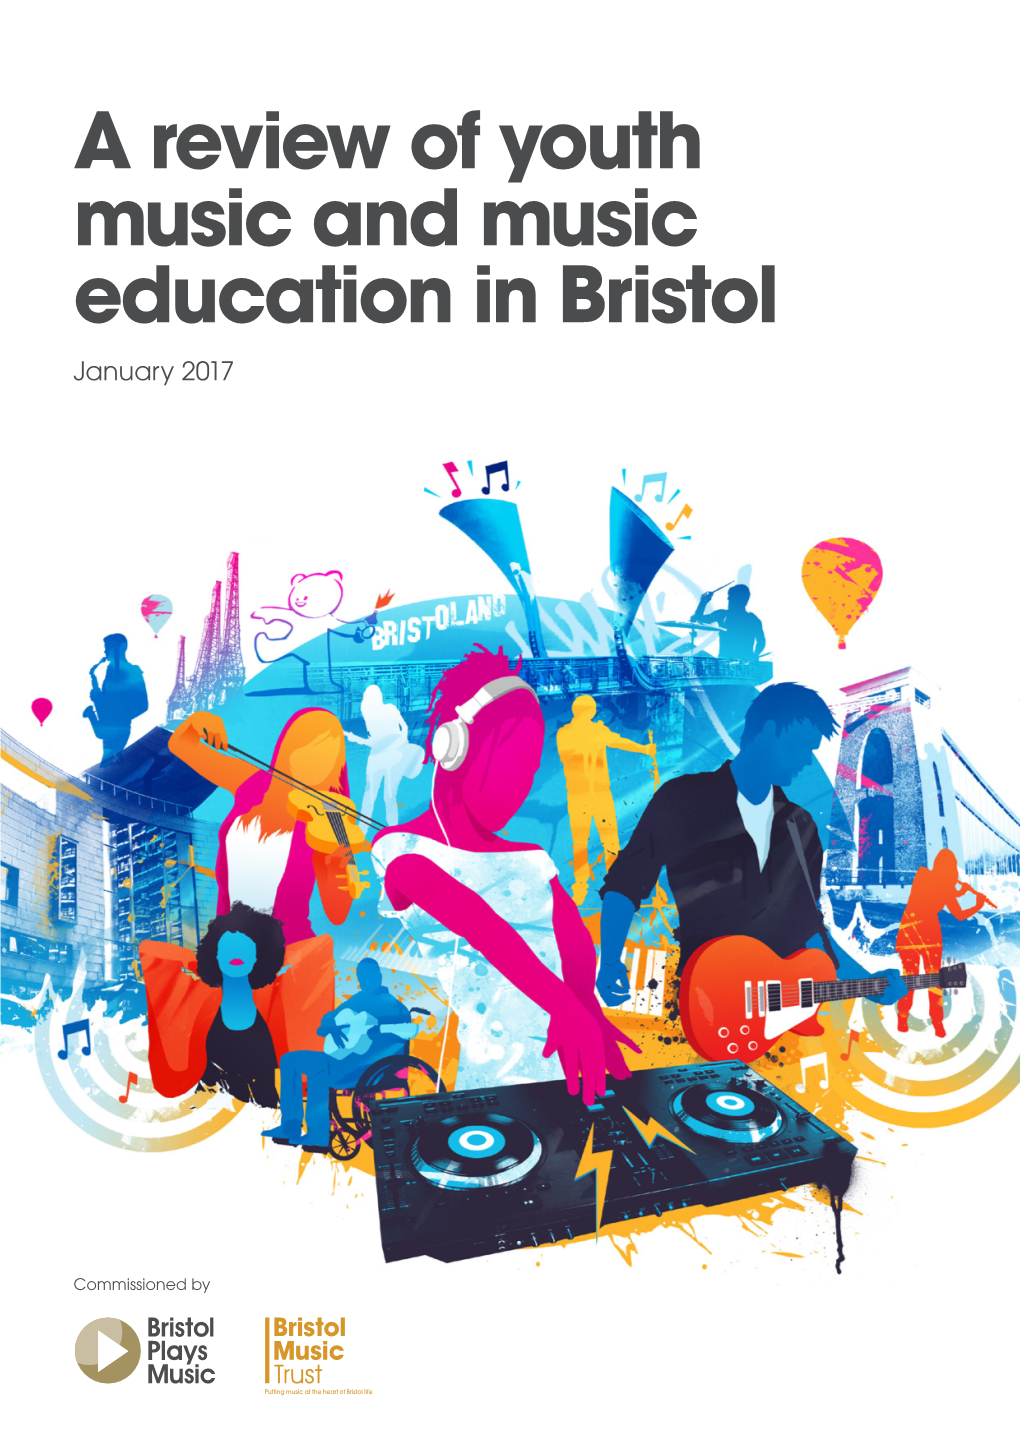 A Review of Youth Music and Music Education in Bristol January 2017